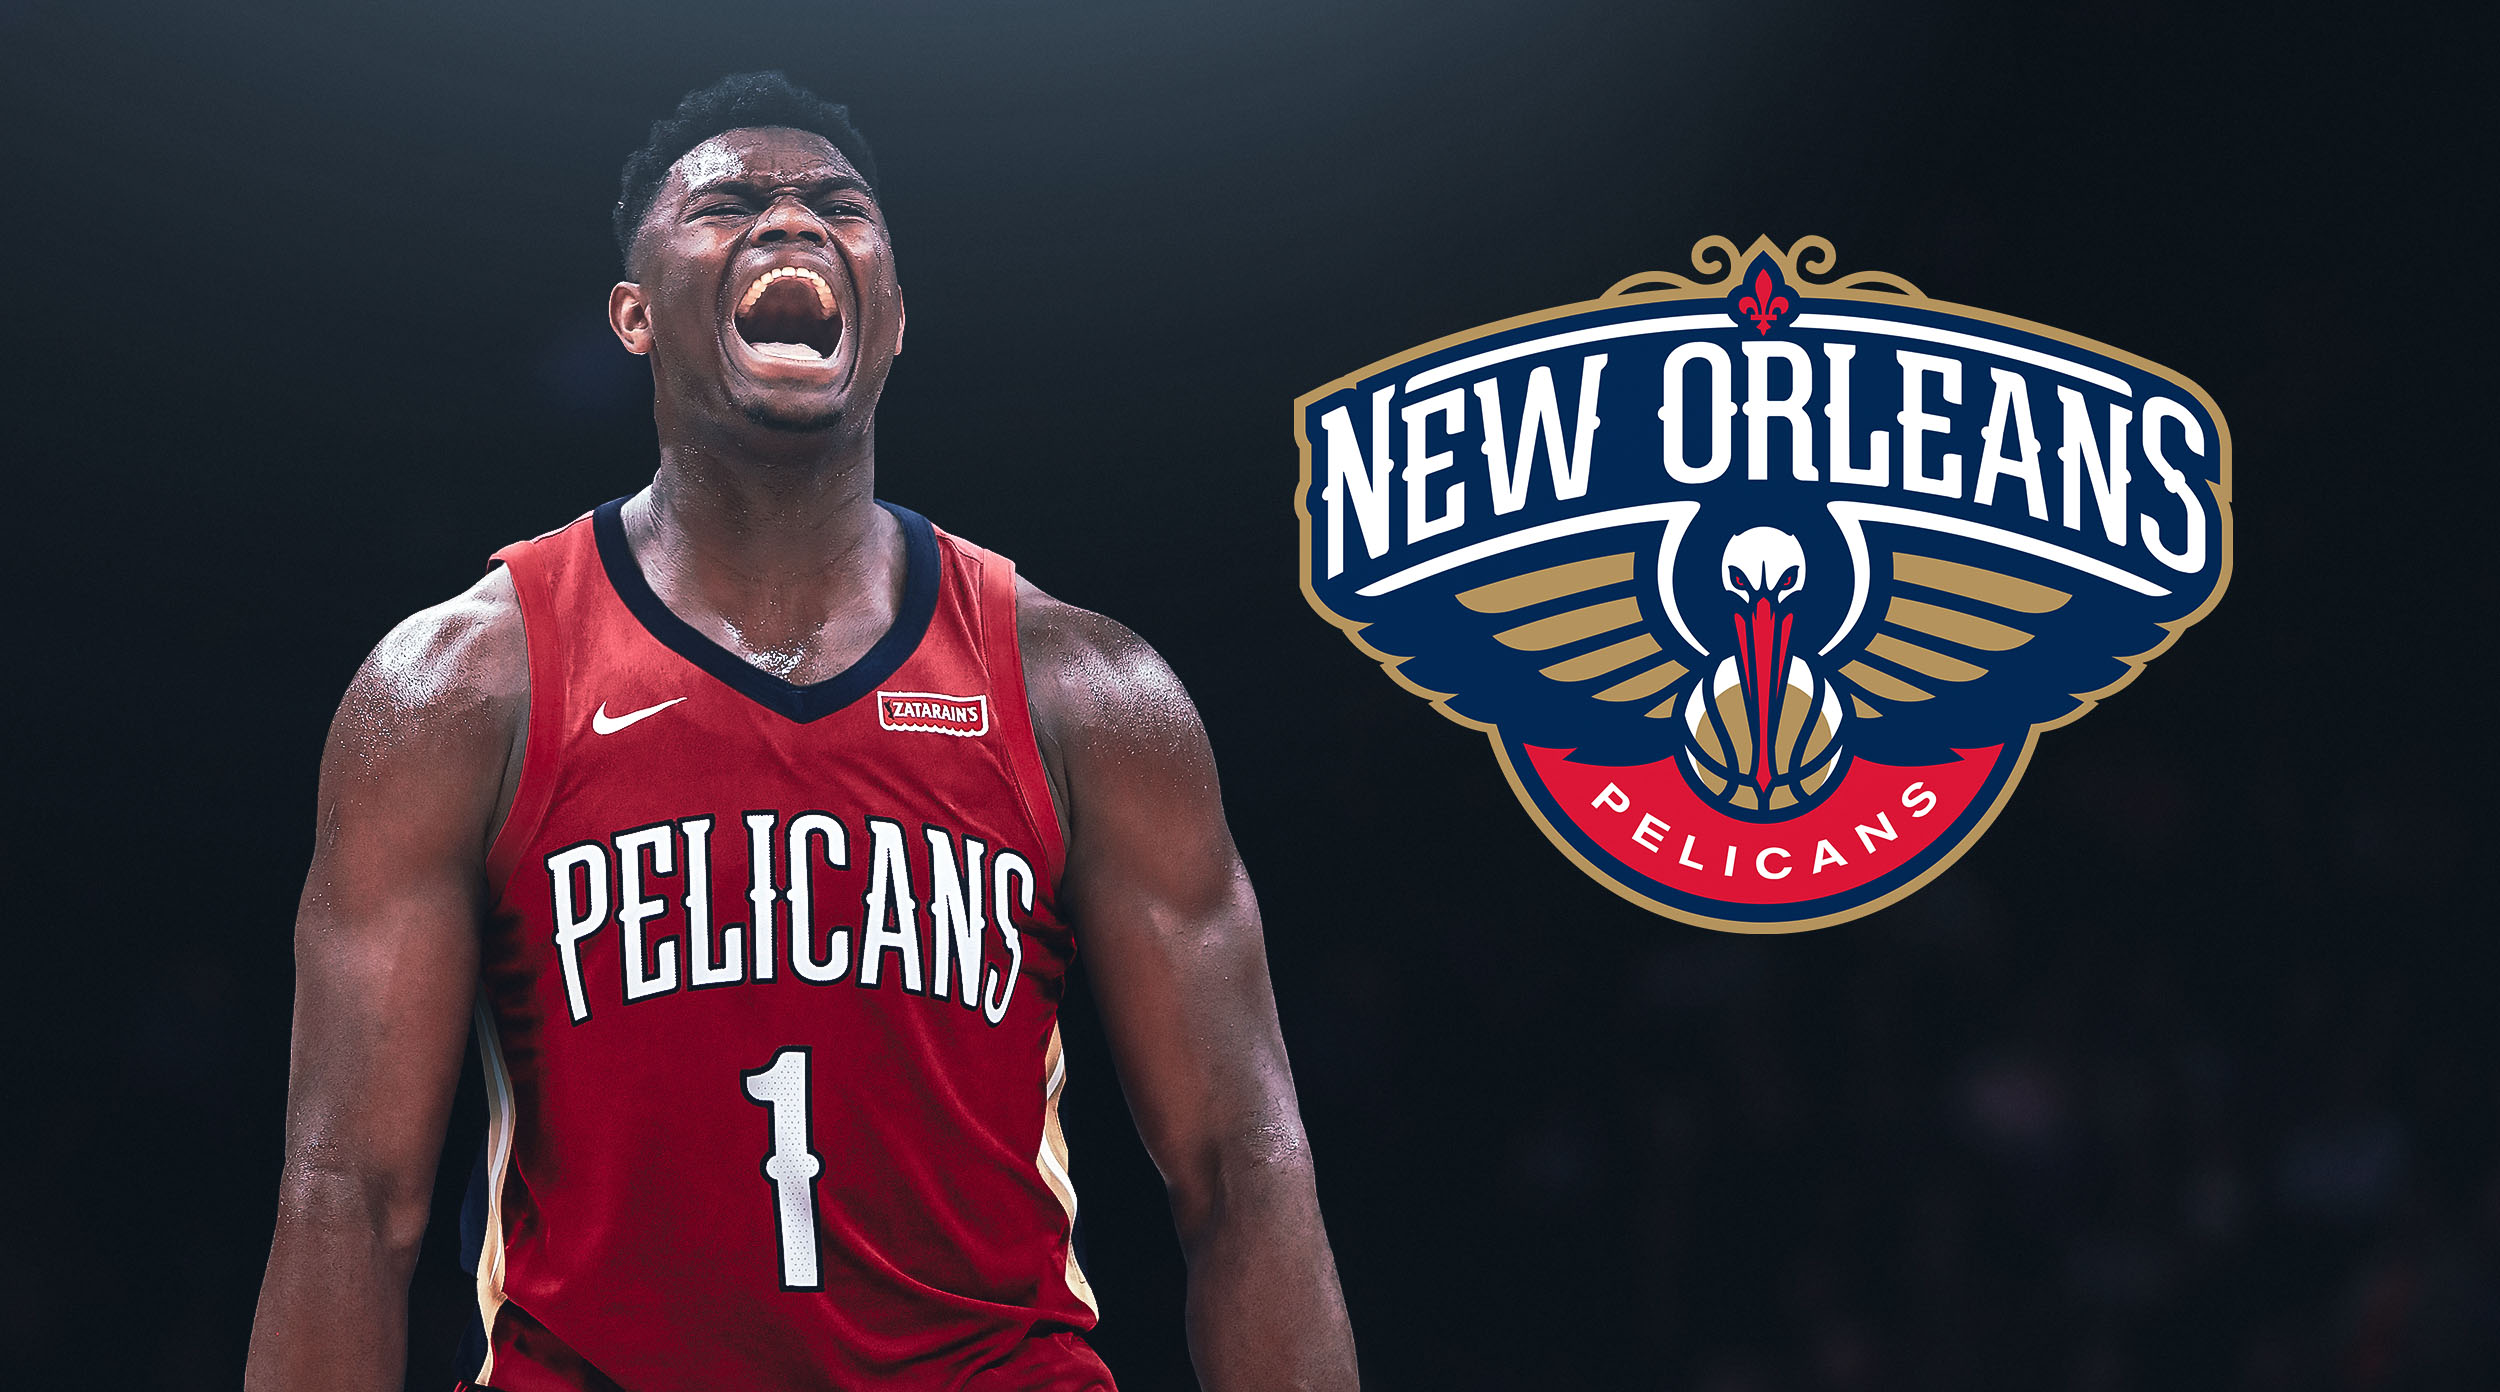 NBA Draft Lottery Pelicans land shot at Zion Williamson in bestcase